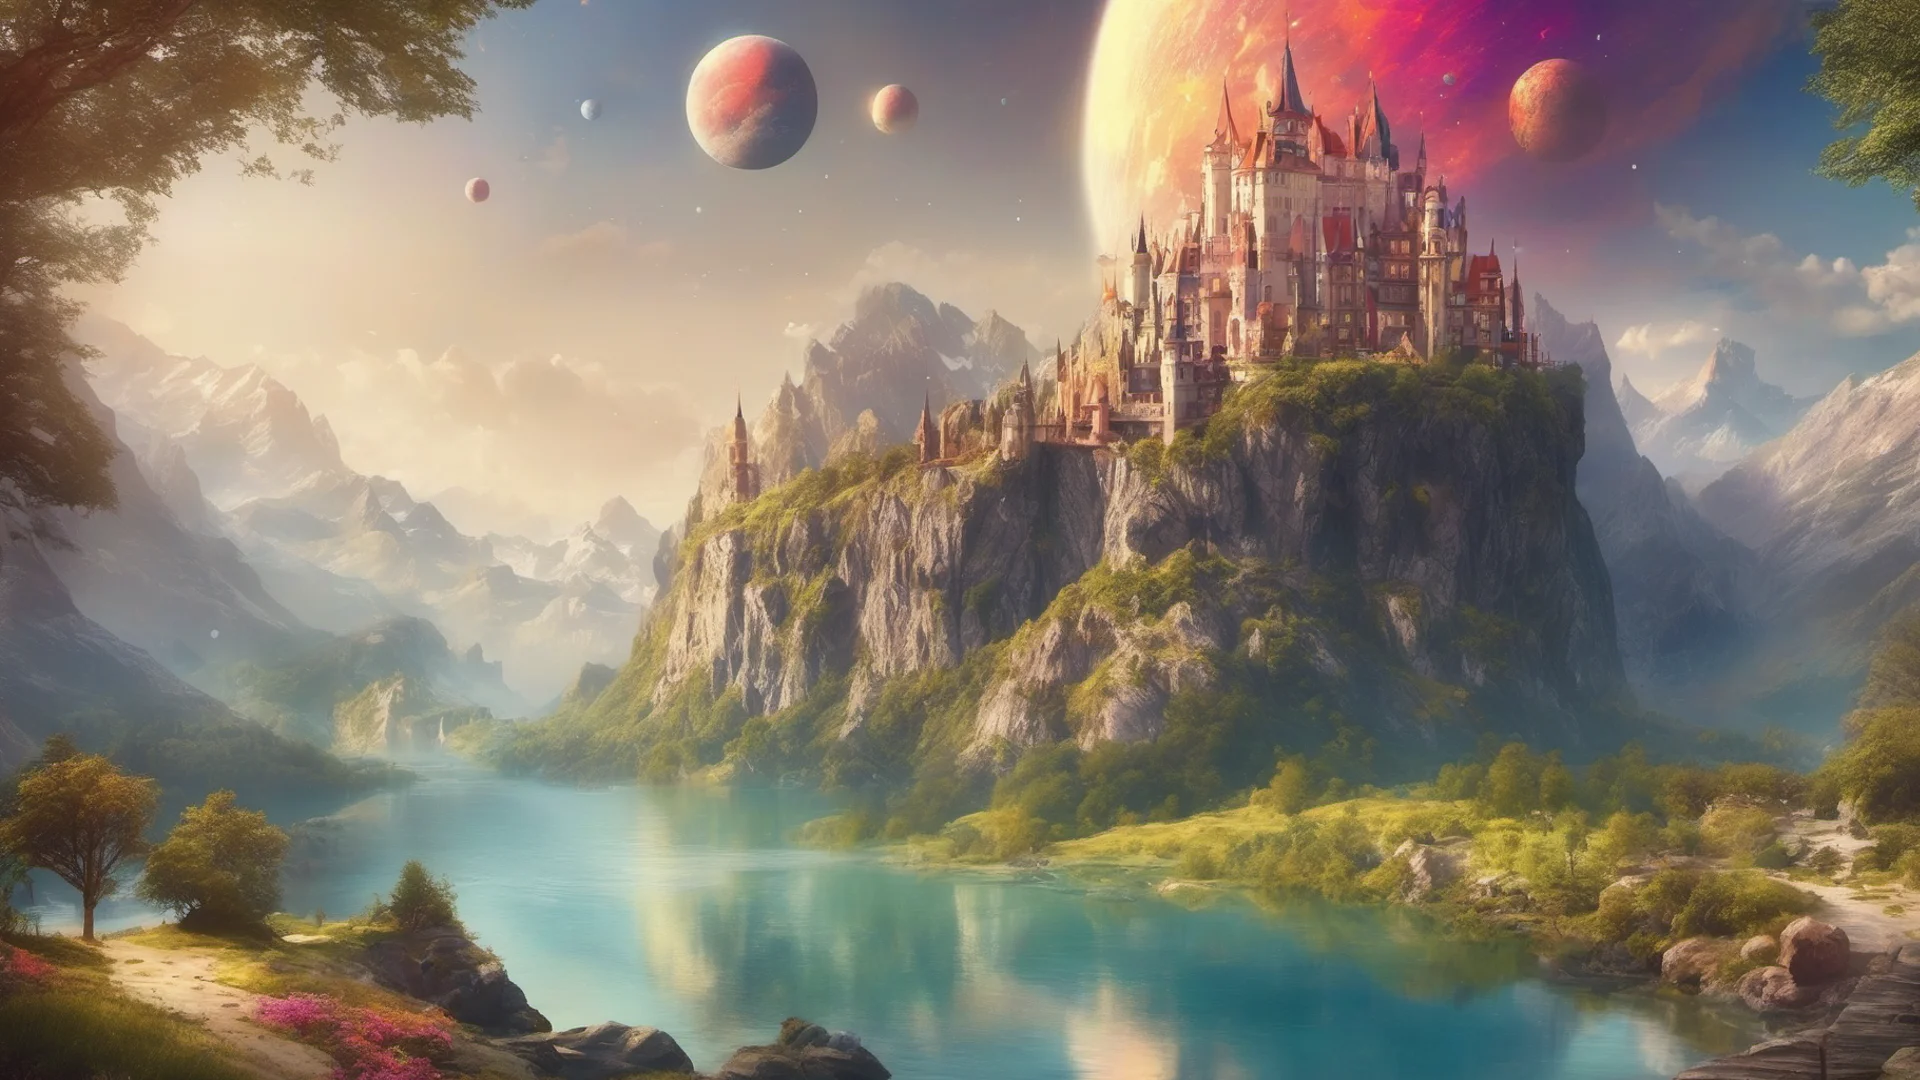 aibeautiful environment castle on mountains with lakes colorful planets confident engaging wow artstation art 3 wide